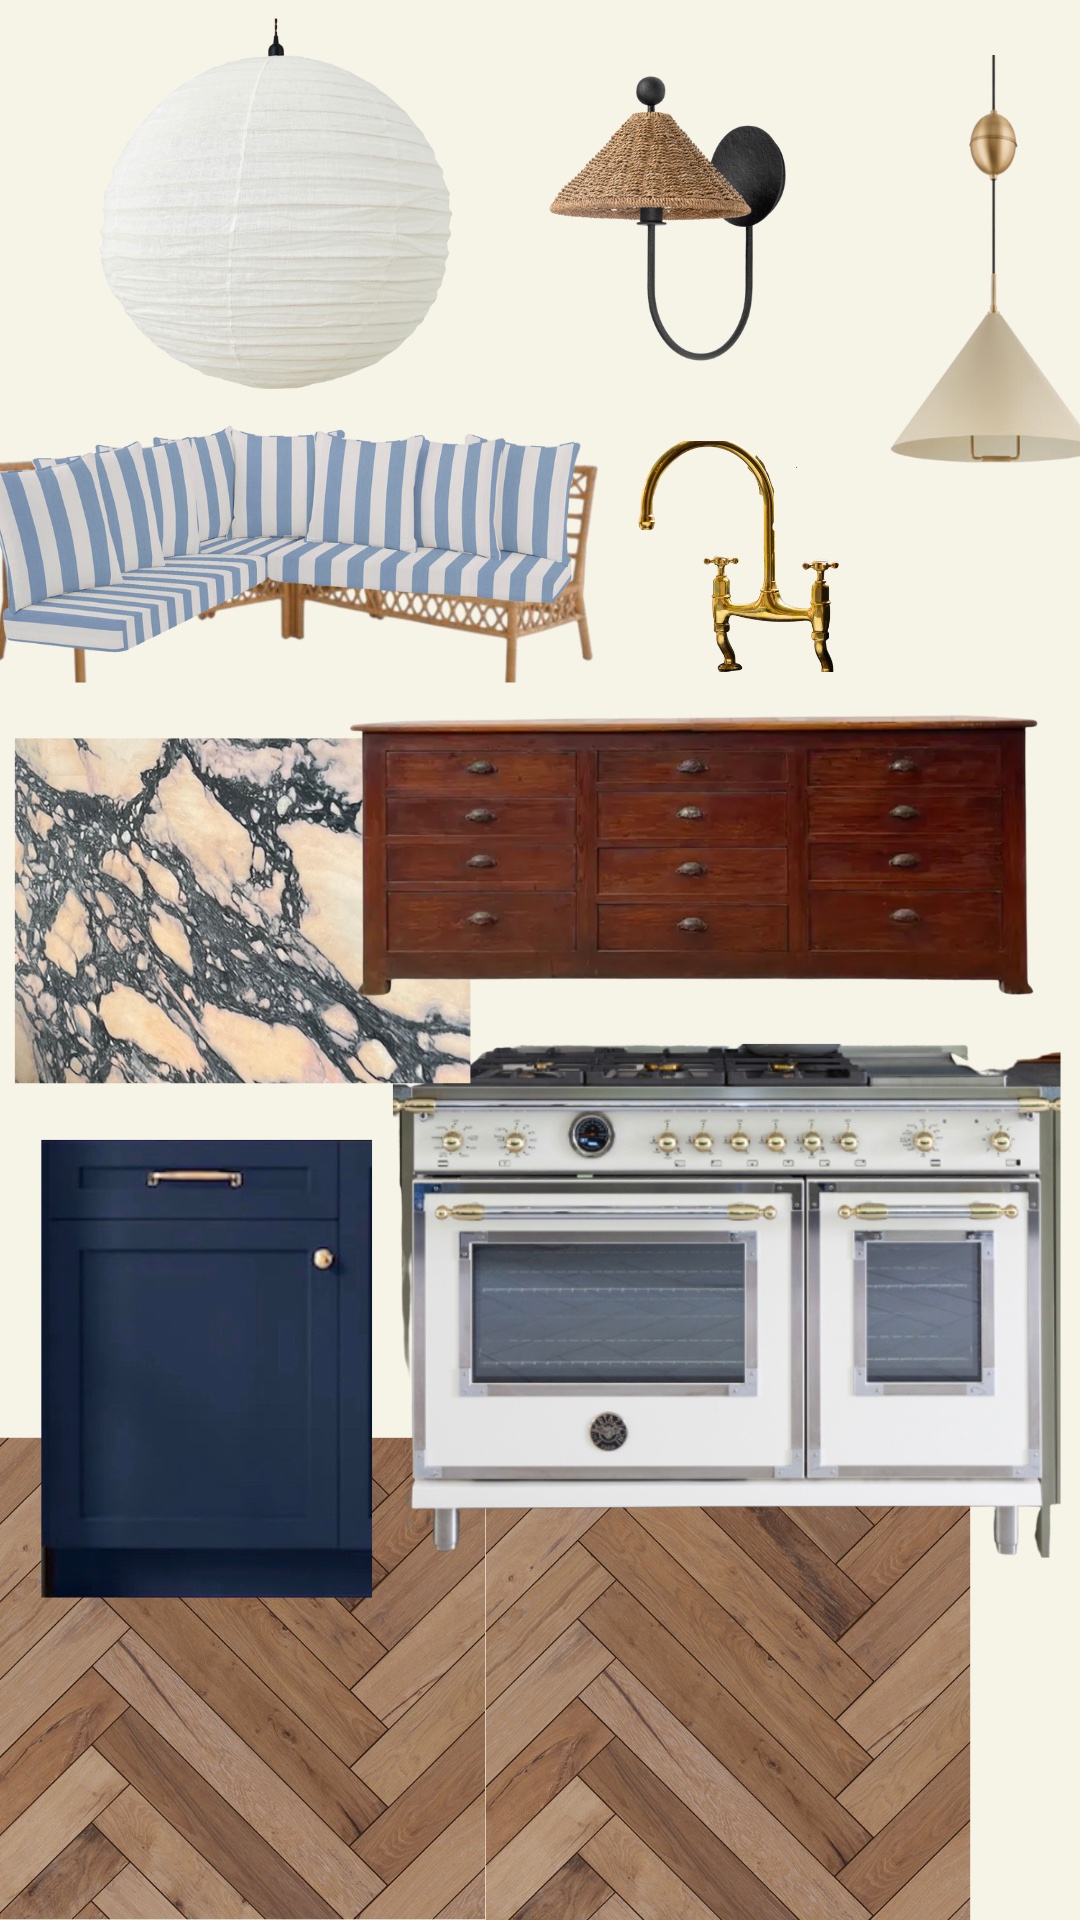 Our 2023 Eclectic Modern Kitchen Renovation: Design Direction, Moodboard and Flooring